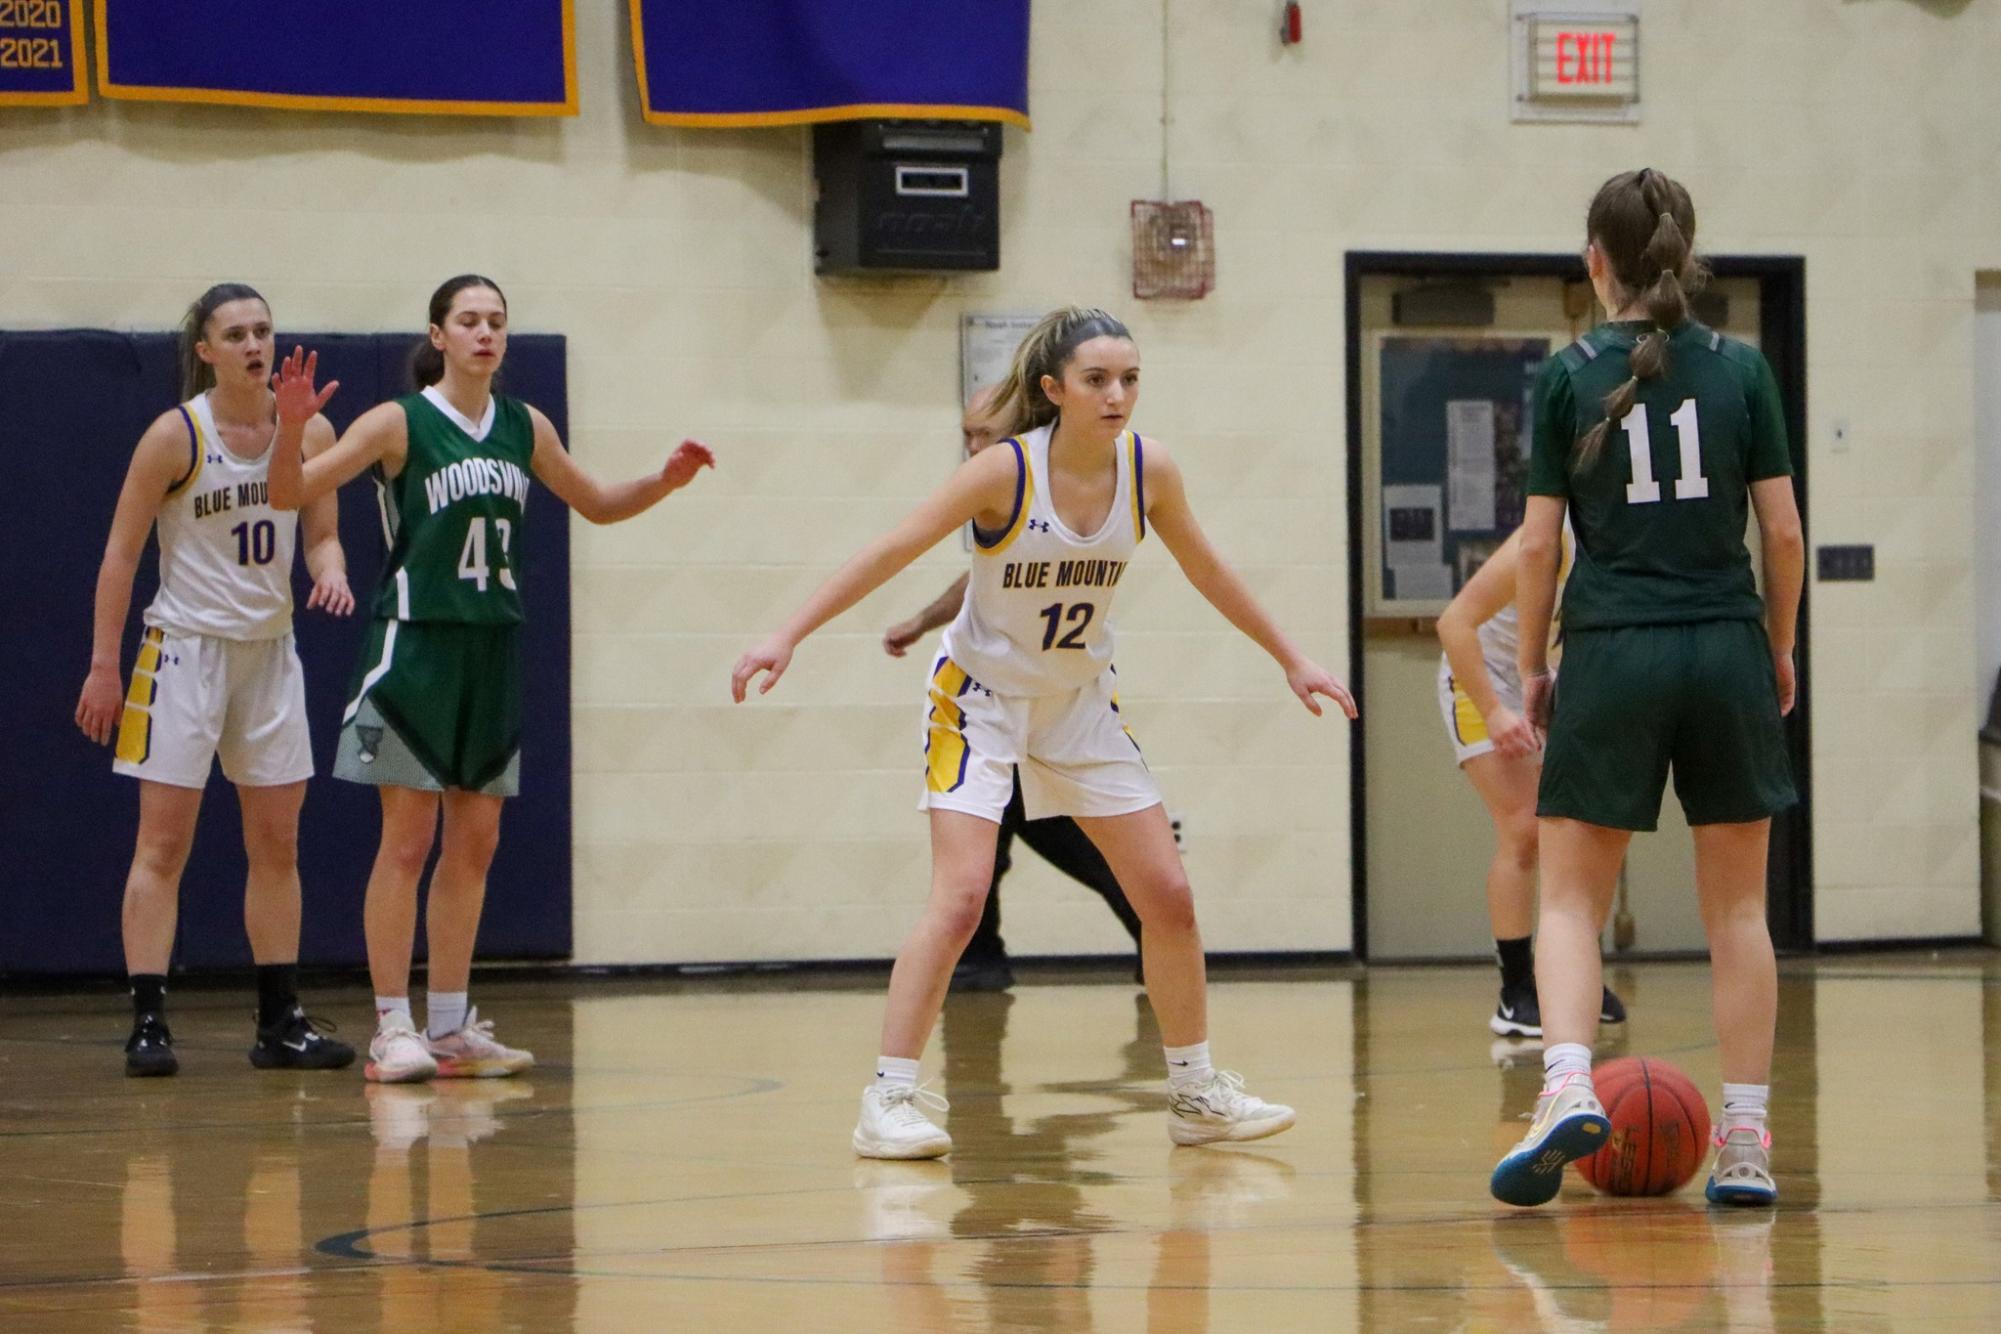 BMU freshman Addison Murray lines up to defend Woodsville sophomore Makayla Walker. Walker was held to only 4 points on the night opposed to her usual 12 ppg. 